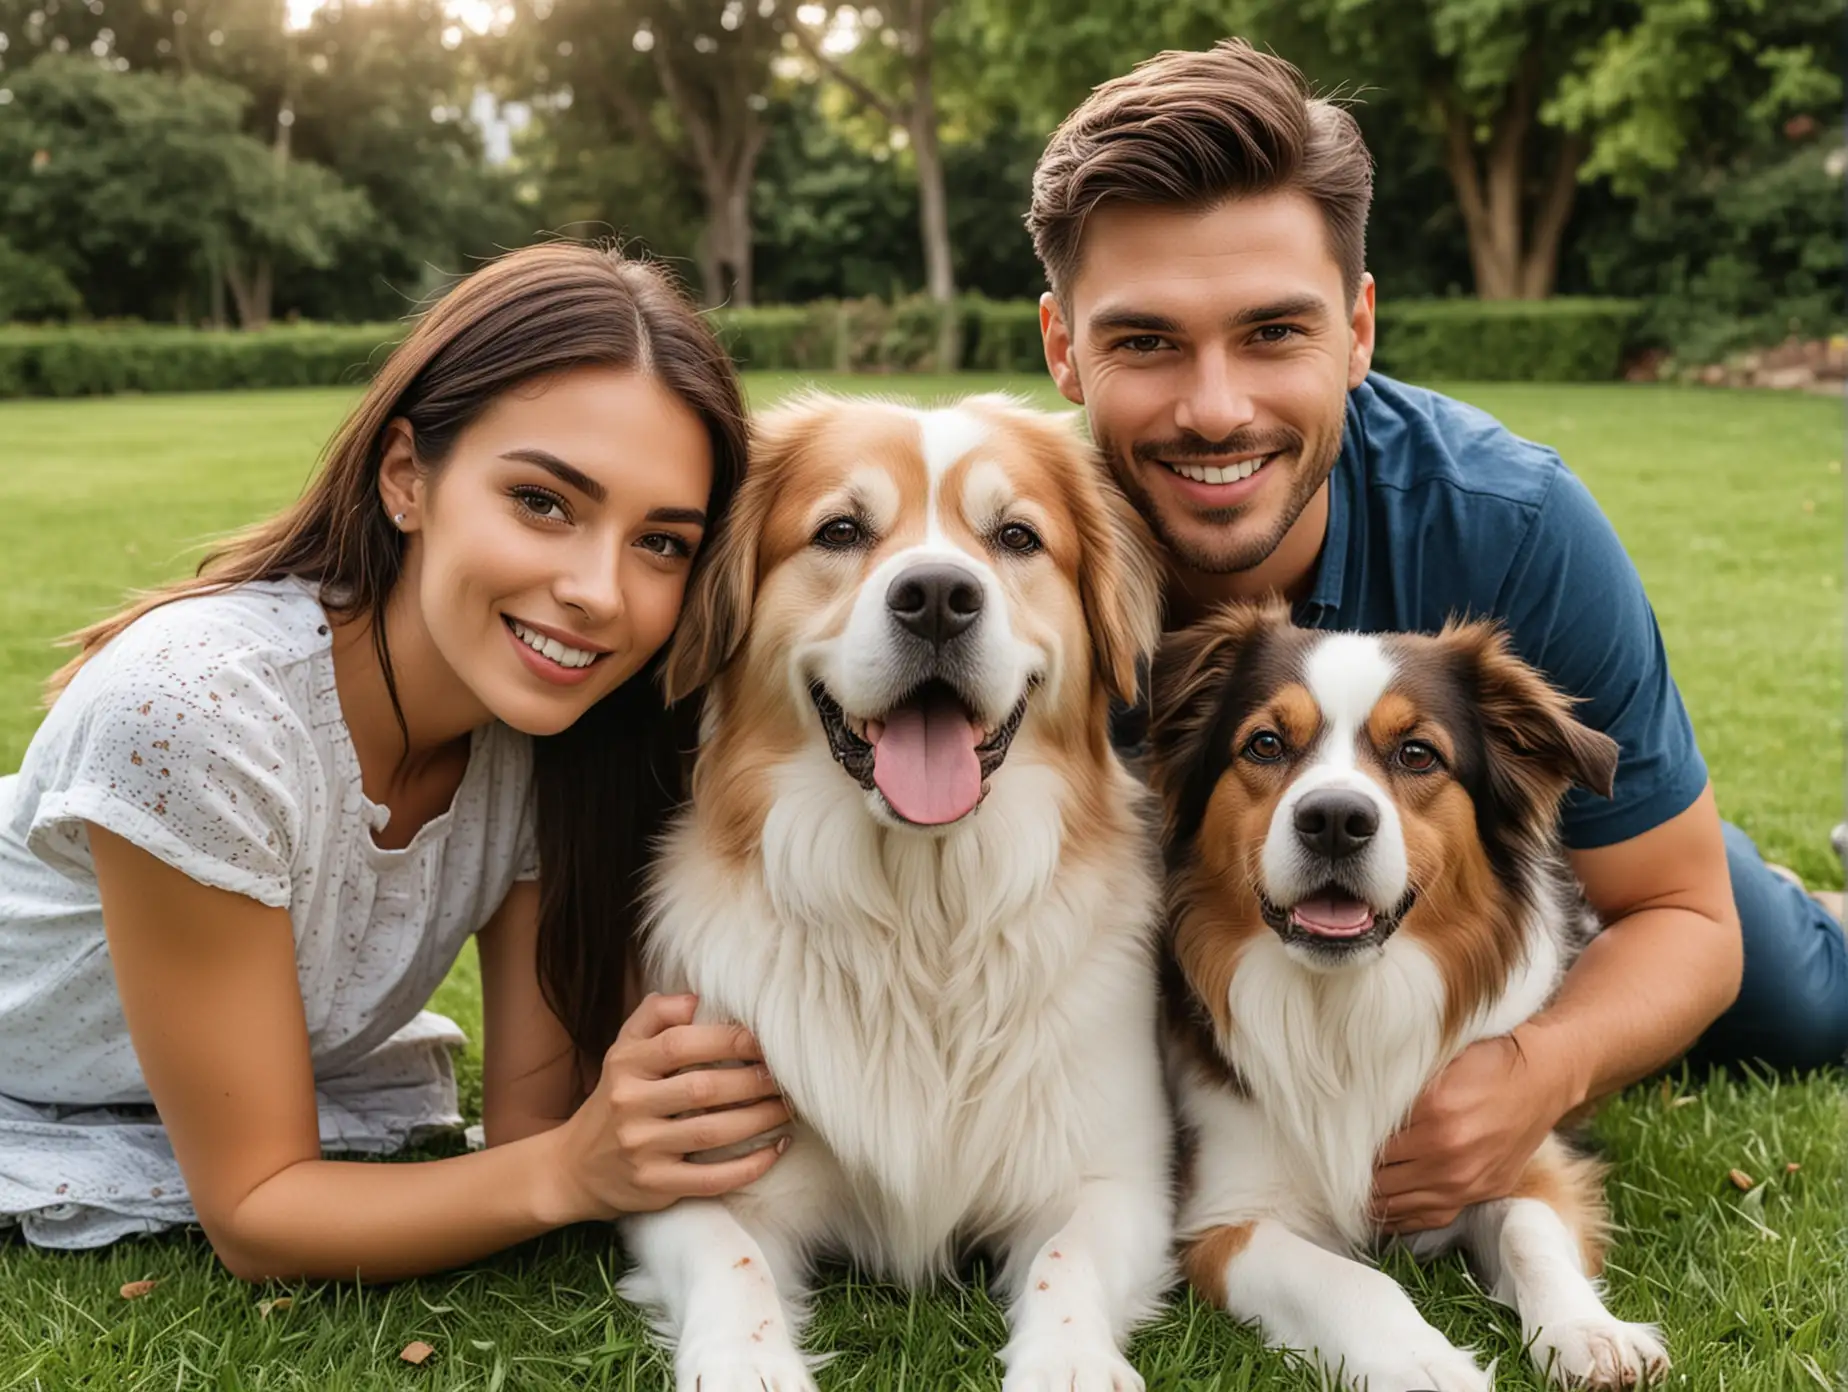 A handsome man and a beautiful woman took a photo with their pet dog on the lawn, with exquisite facial features and professional photography technology